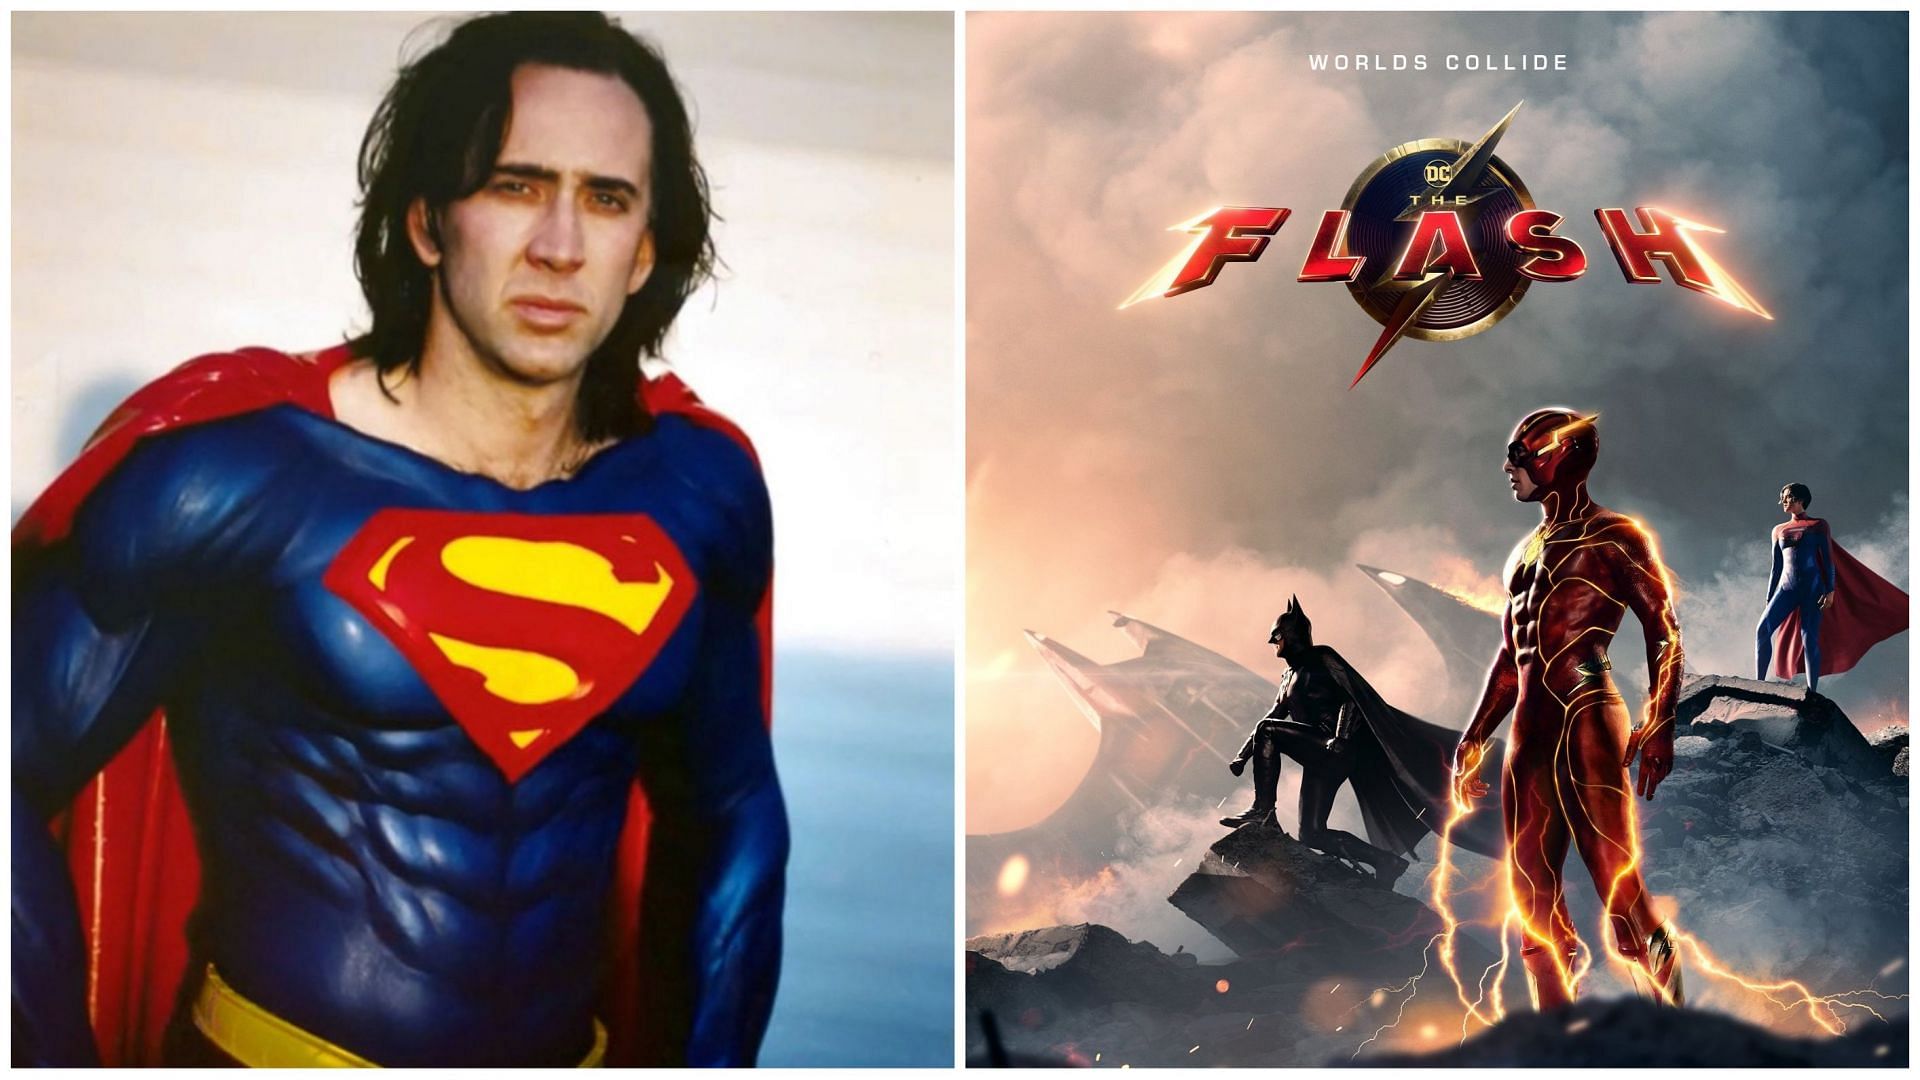 Nicolas Cage as Superman and The Flash poster (Images via @sambluemanning/Twitter and Warner Bros Pictures)